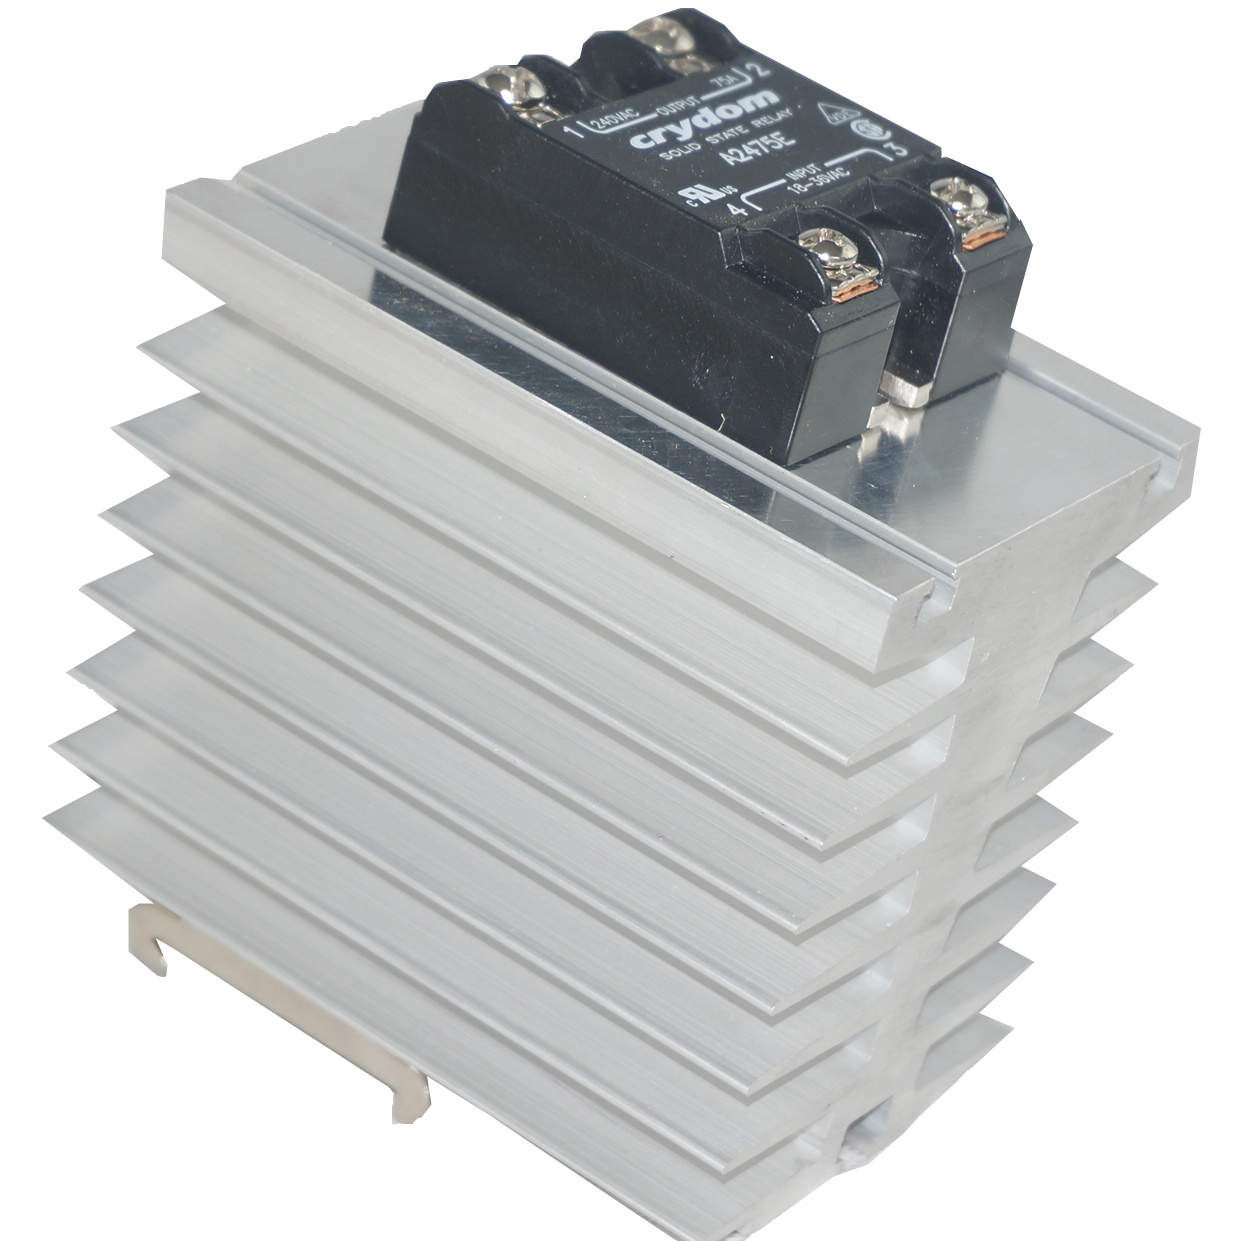 GFIN/150M-DR + D2475, Din Rail Mount Solid State Relay with Heatsink, 4-32VDC Control Input, 24-280VAC Output, 68 Amps @ 40 Deg C ambient